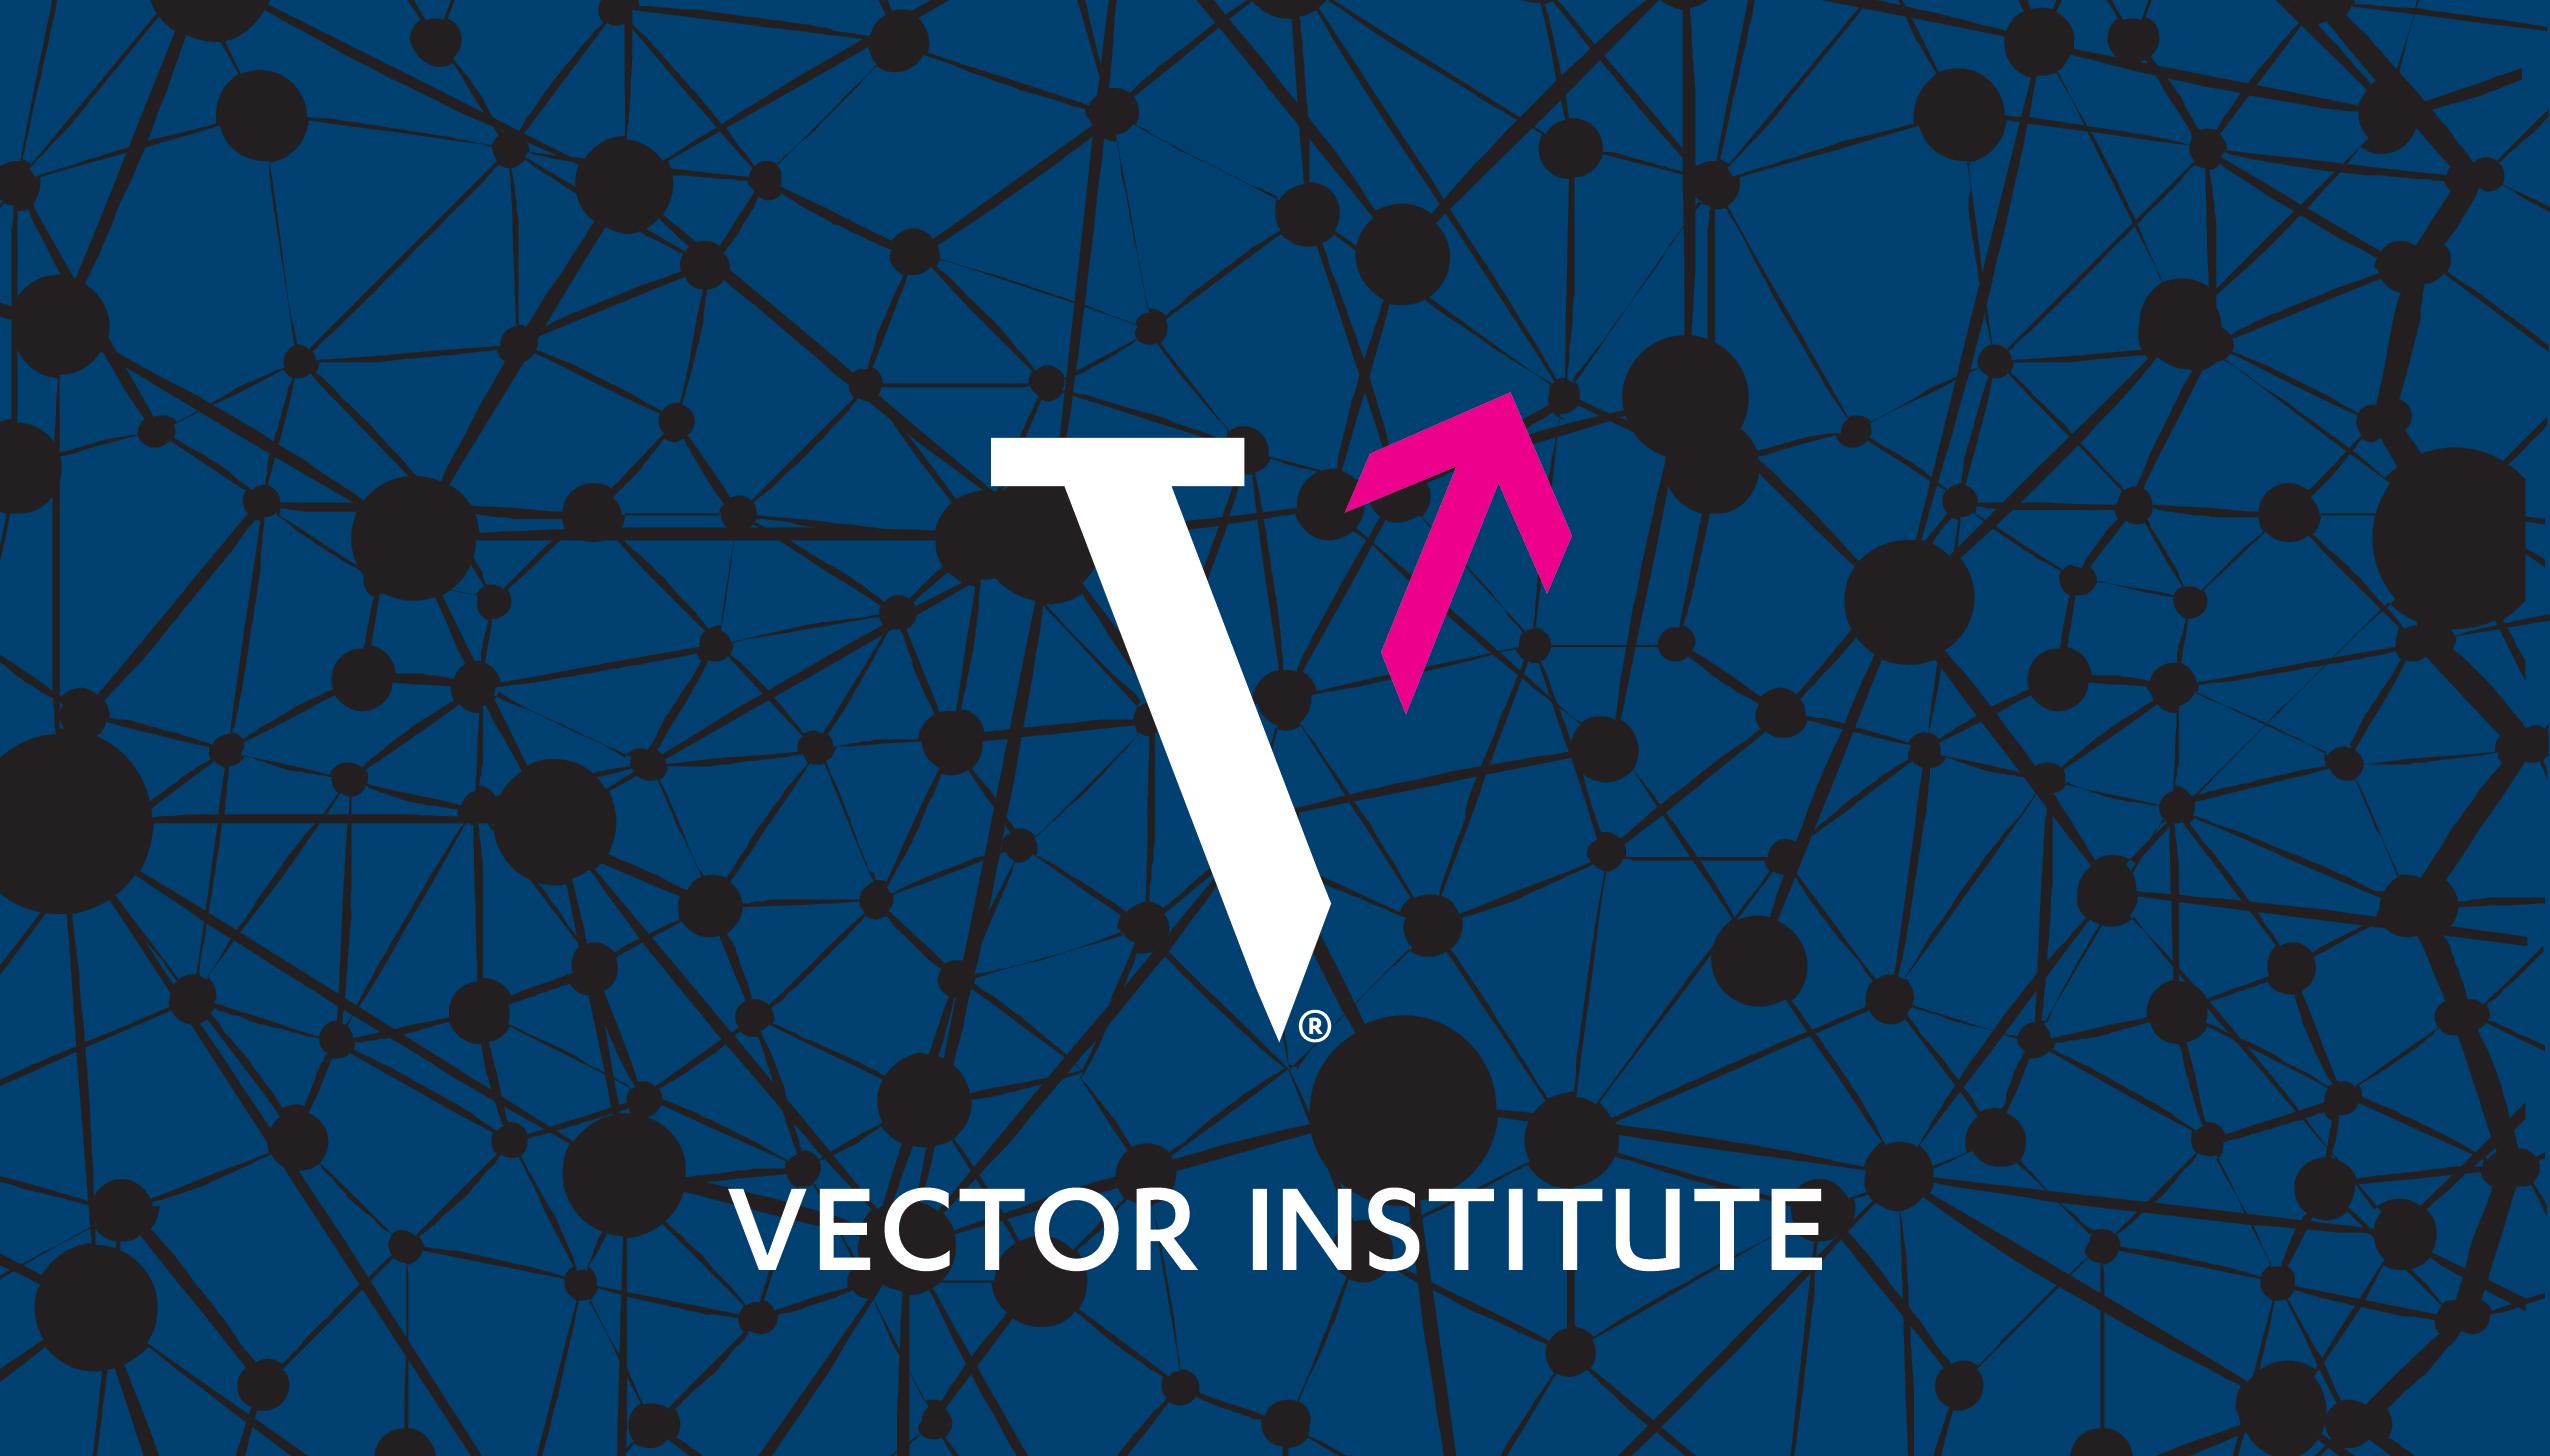 Product Machine learning platform helps enable early diagnosis of life-threatening infection in premature infants - Vector Institute for Artificial Intelligence image